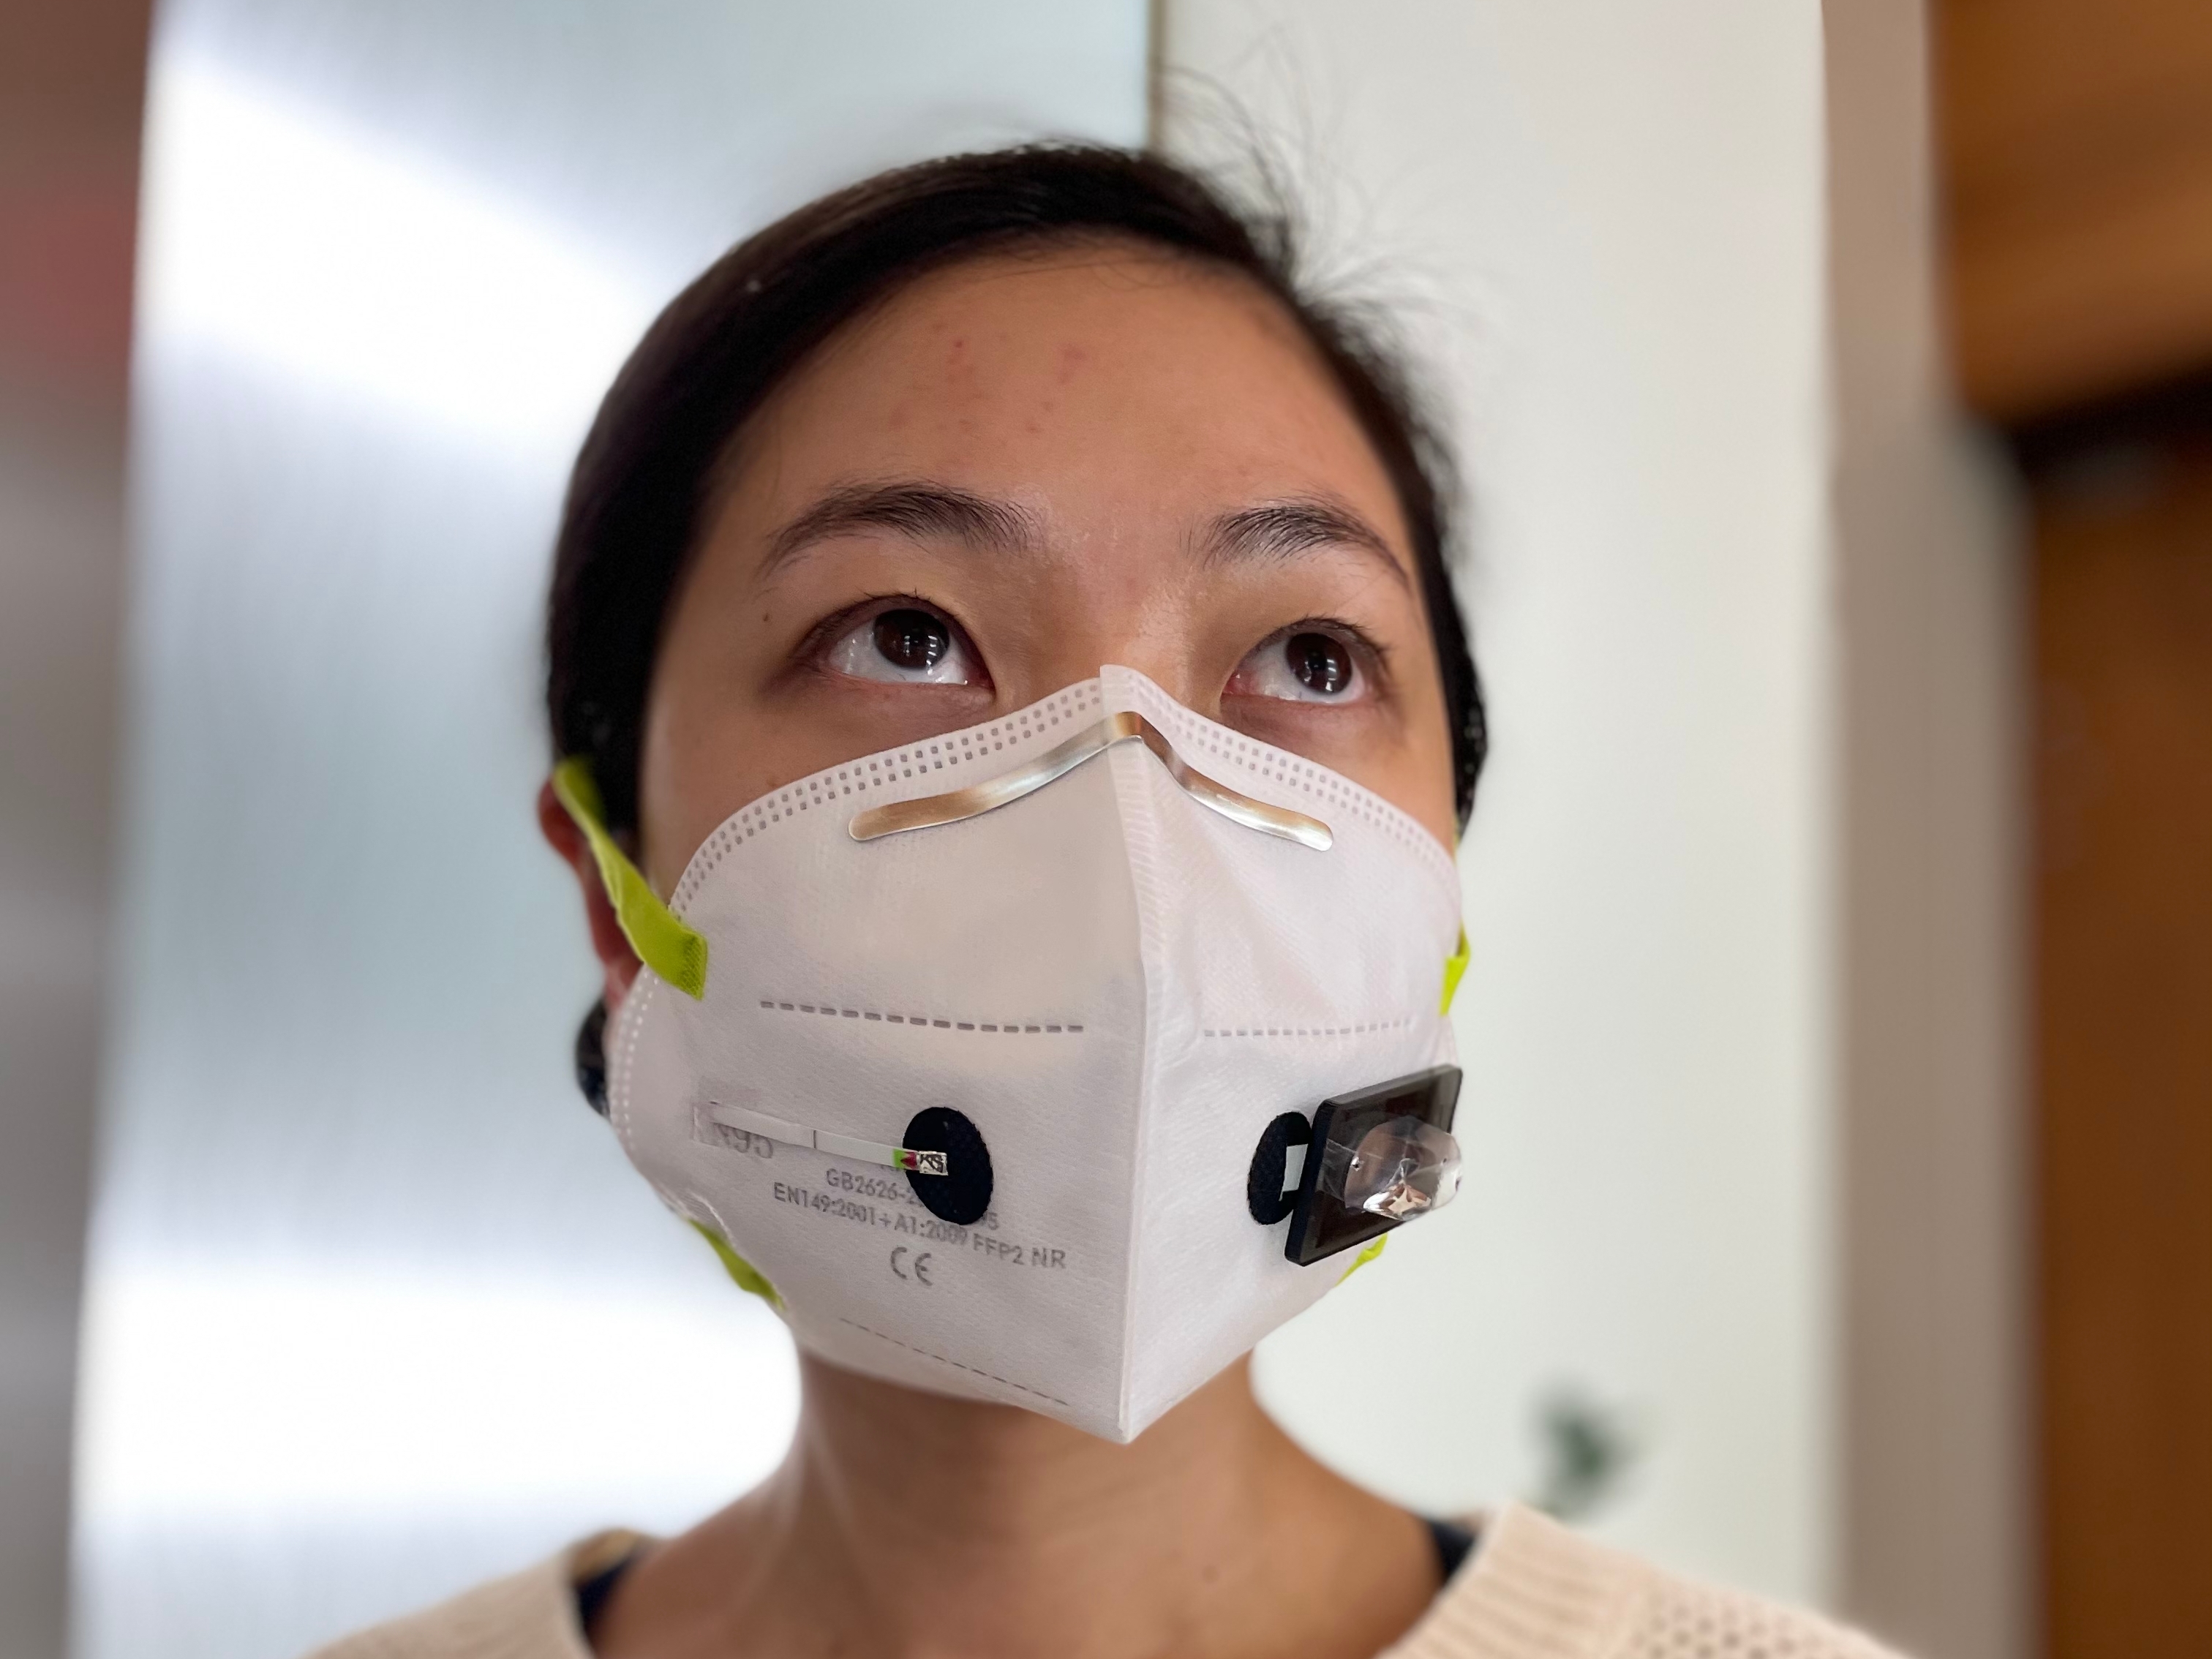 face mask that detect COVID? Harvard, researchers have the technology to make it possible The Boston Globe